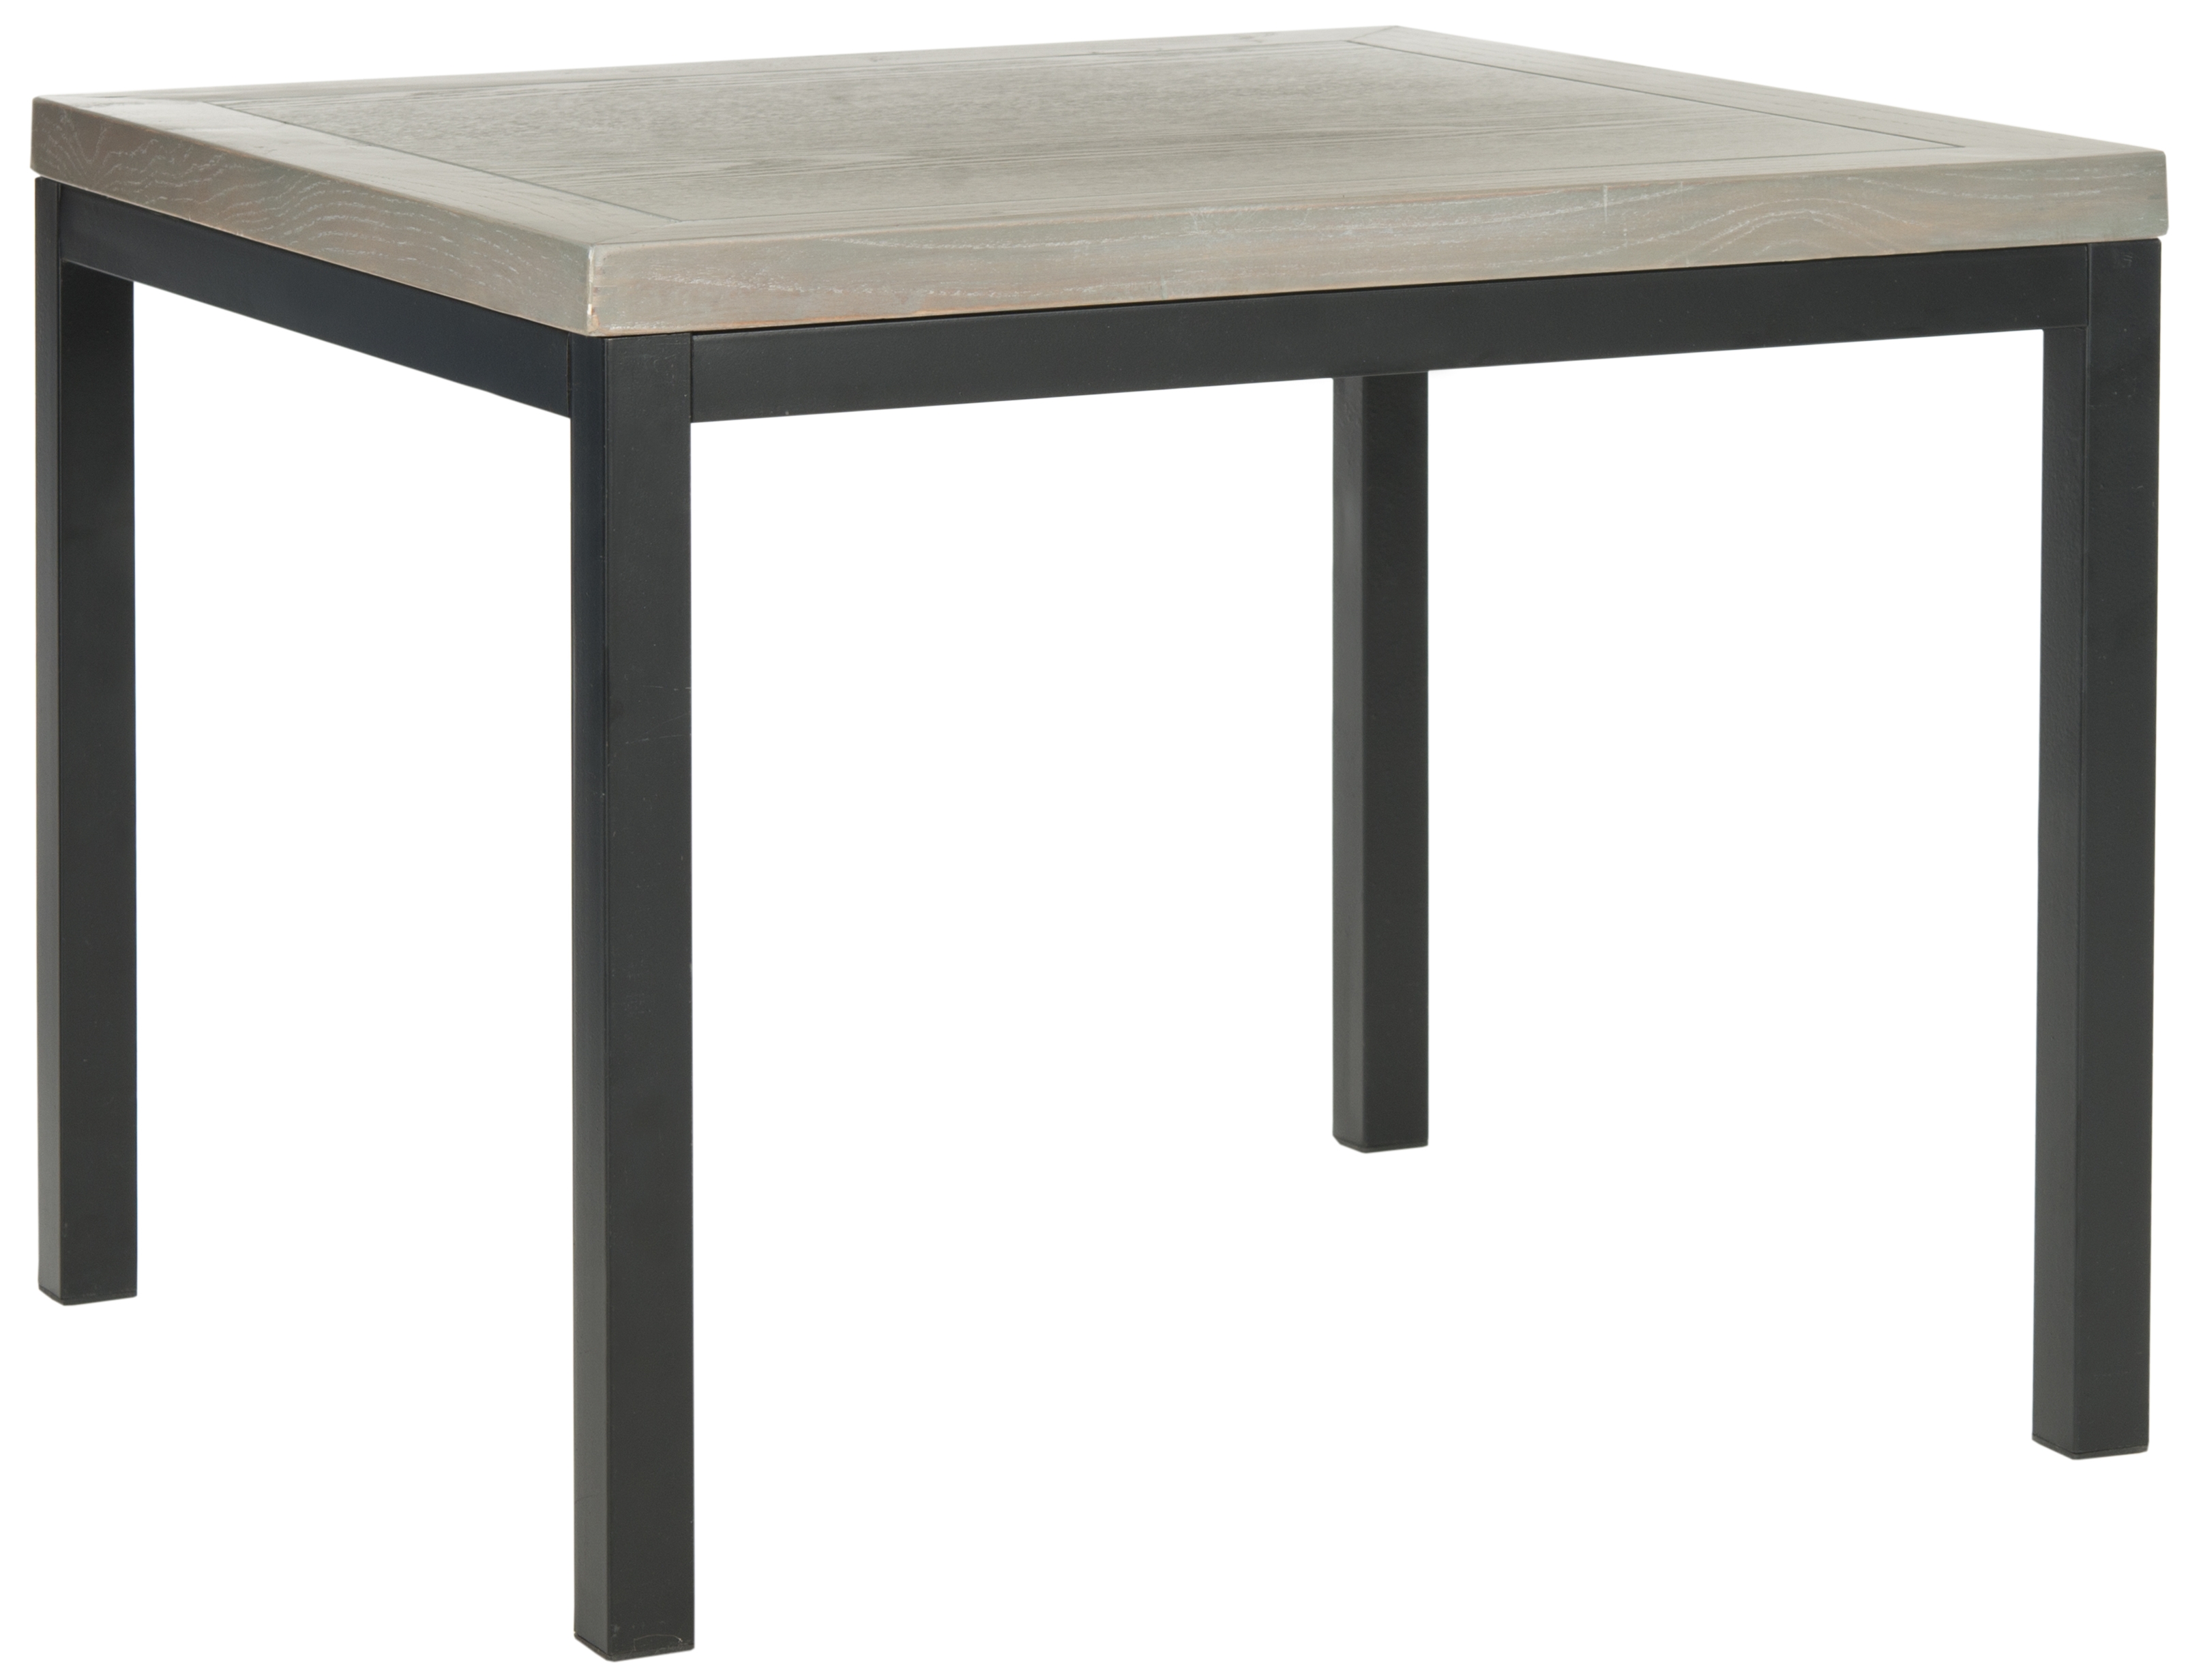 Dennis Wood Top Side Table - French Grey - Arlo Home - Image 1